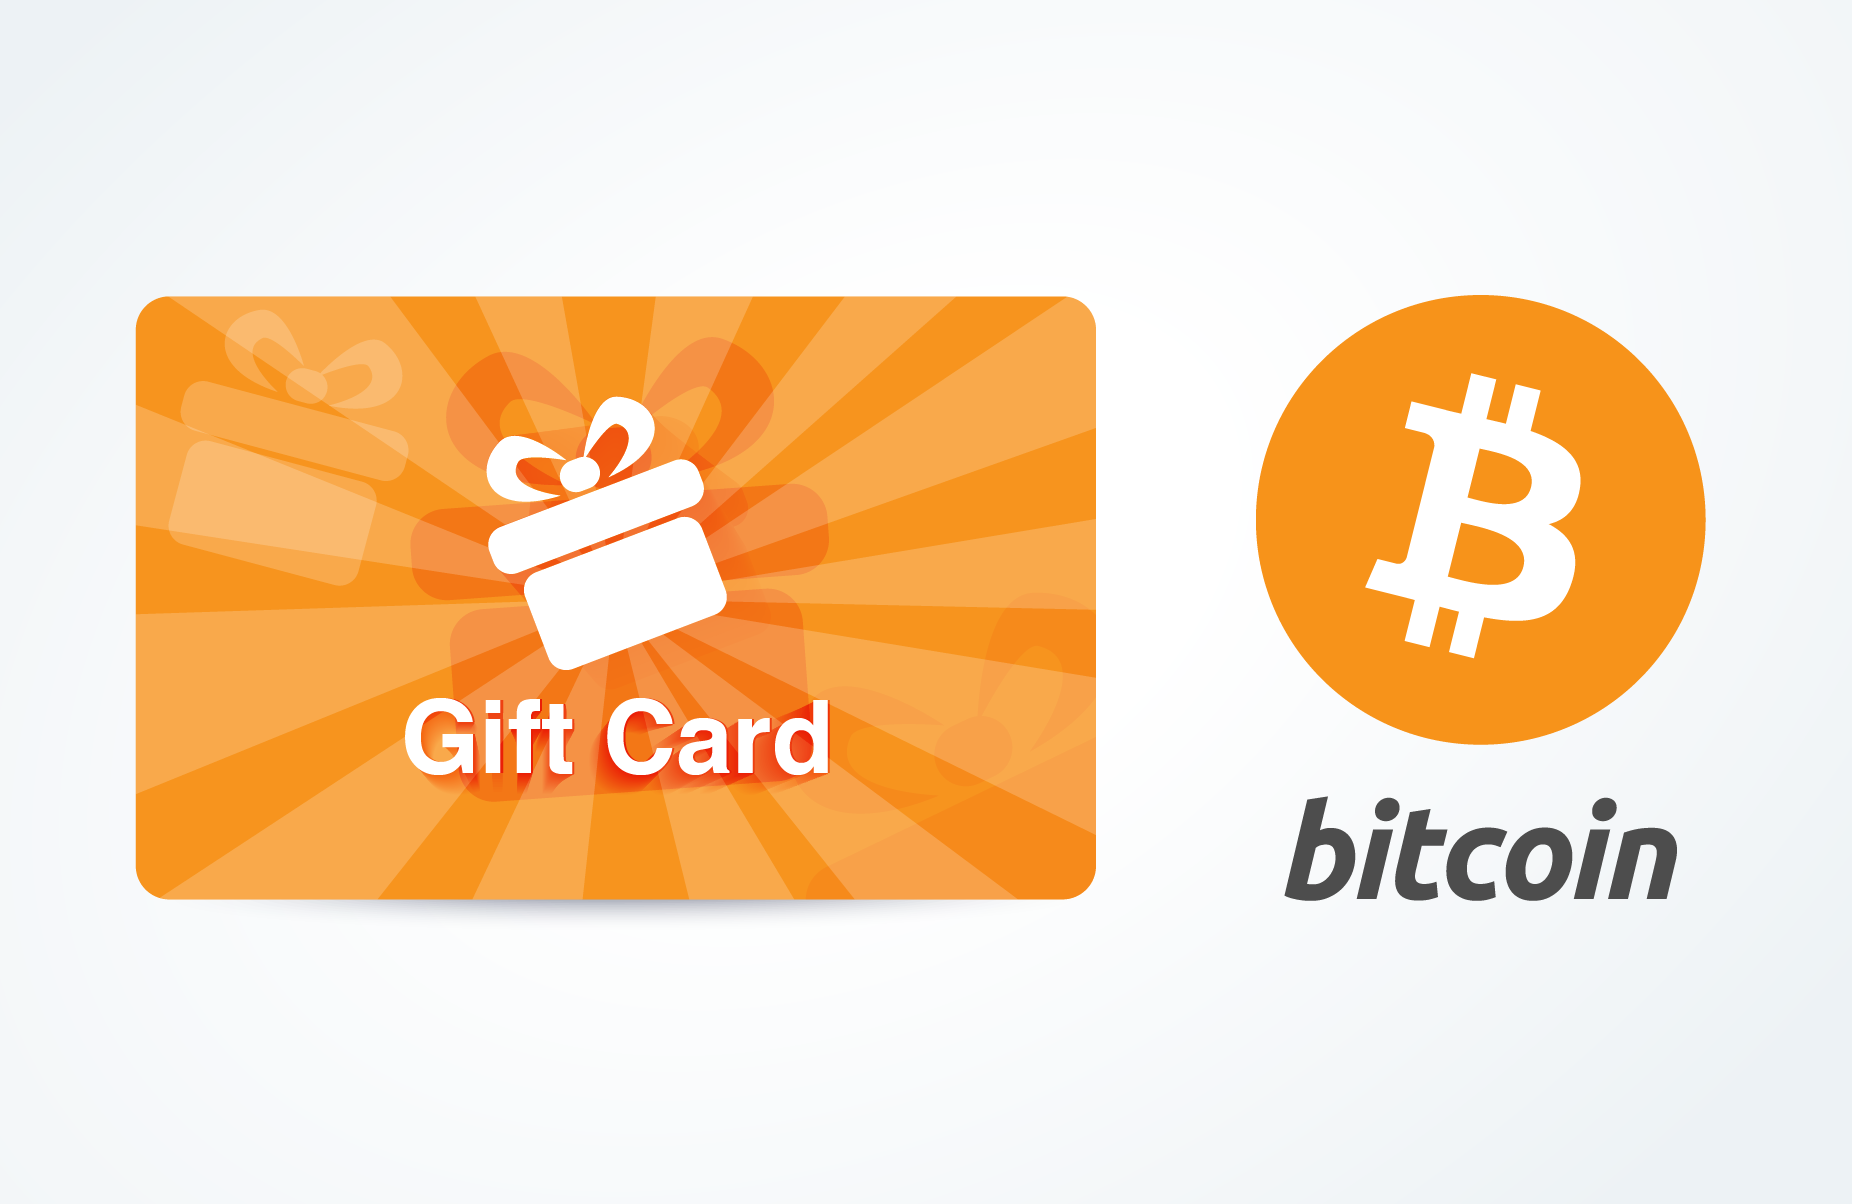 Pay for Gift Cards with Crypto